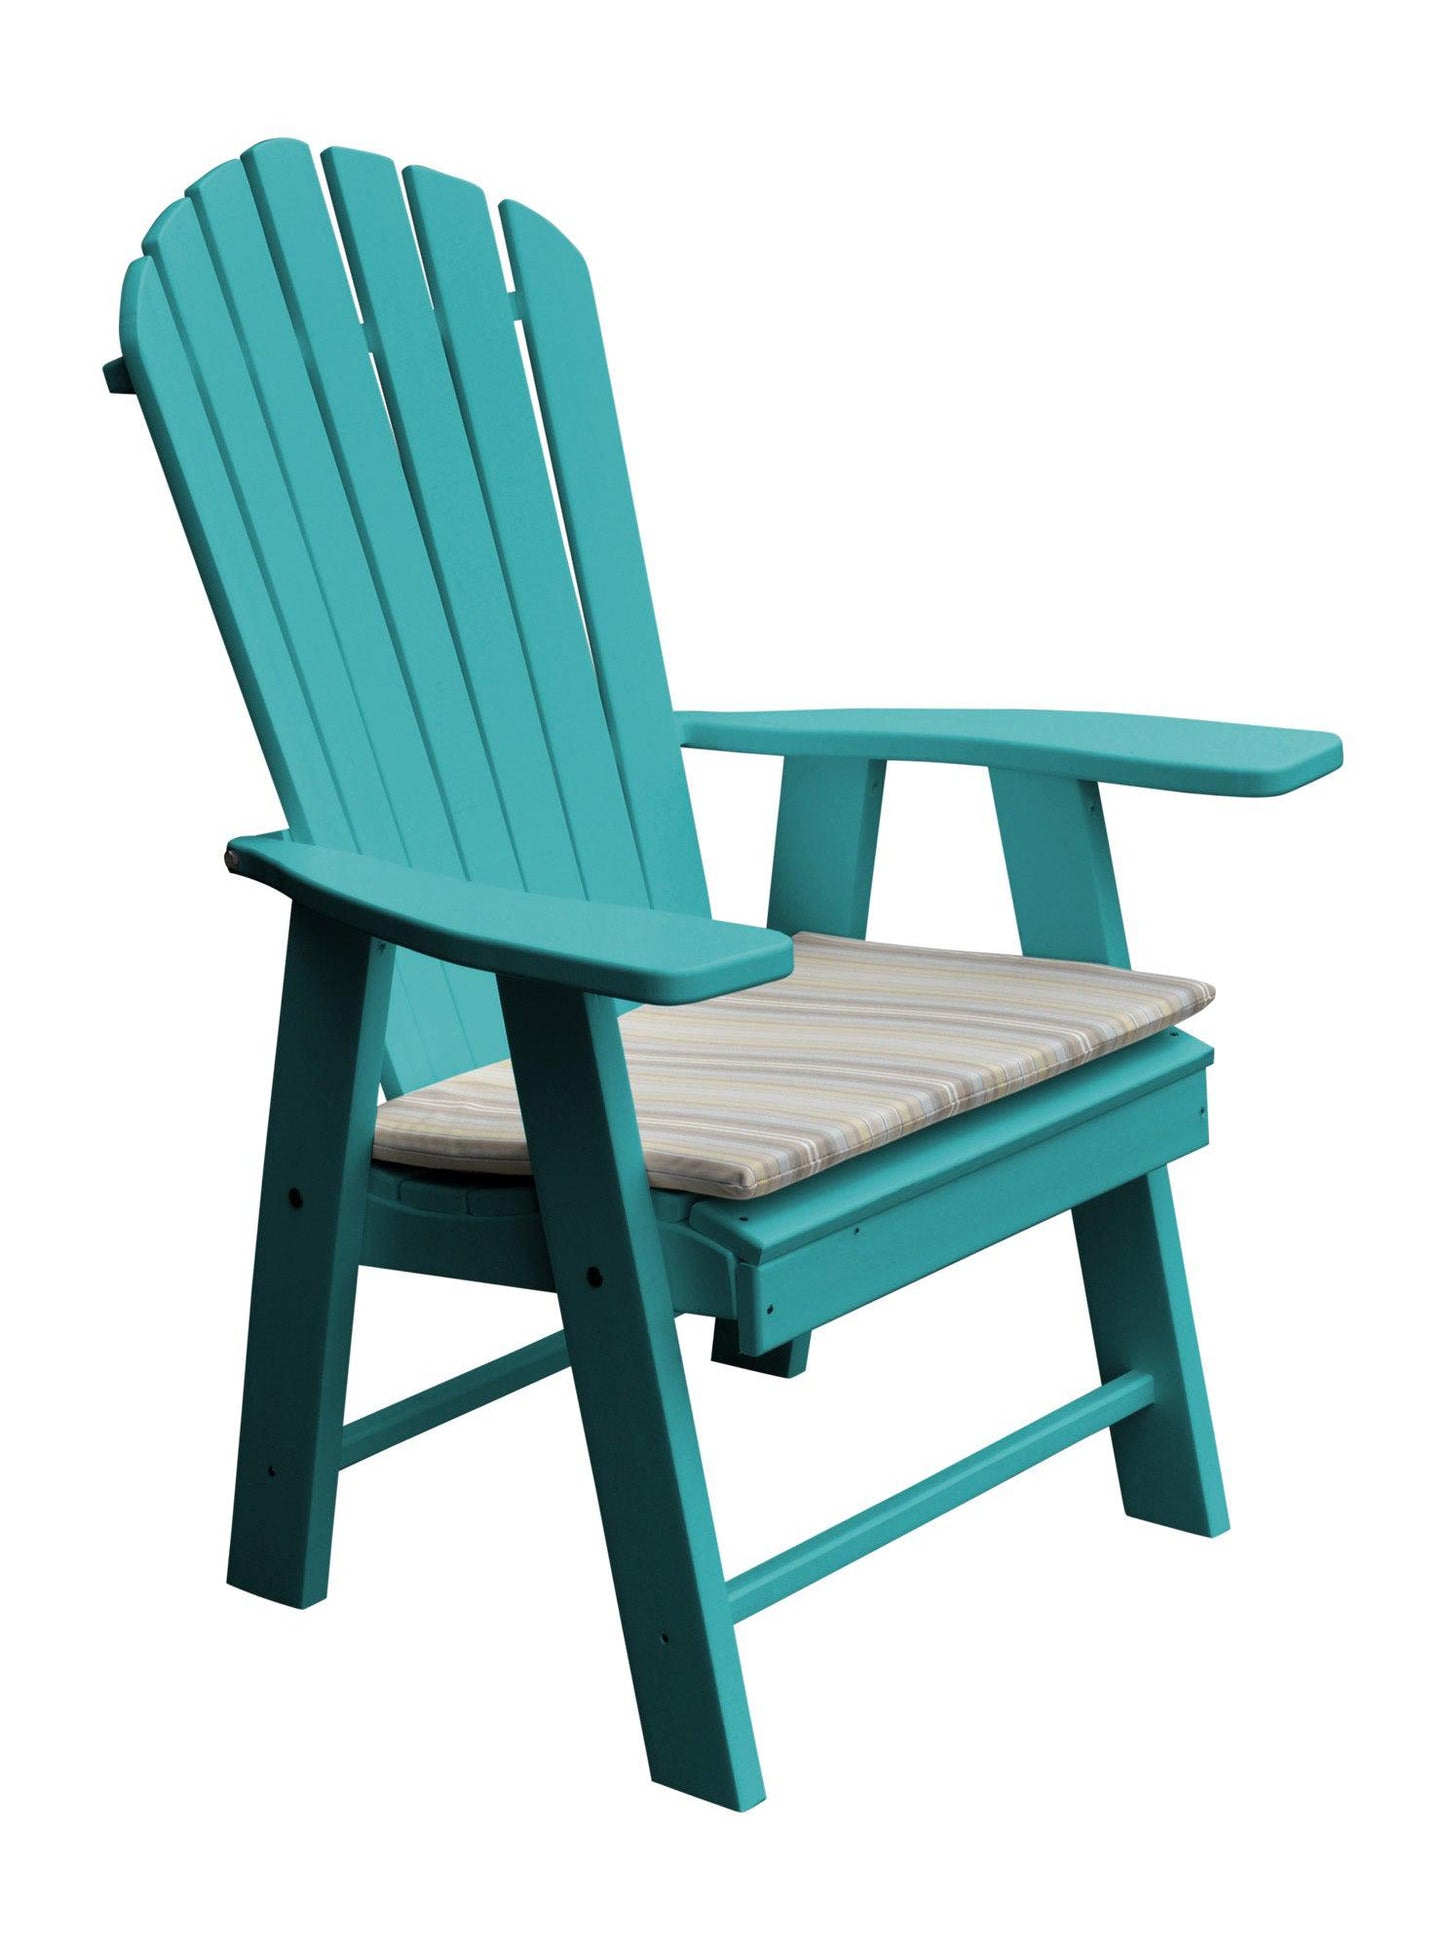 a&l recycled plastic upright adirondack chair aruba blue with seat cushion